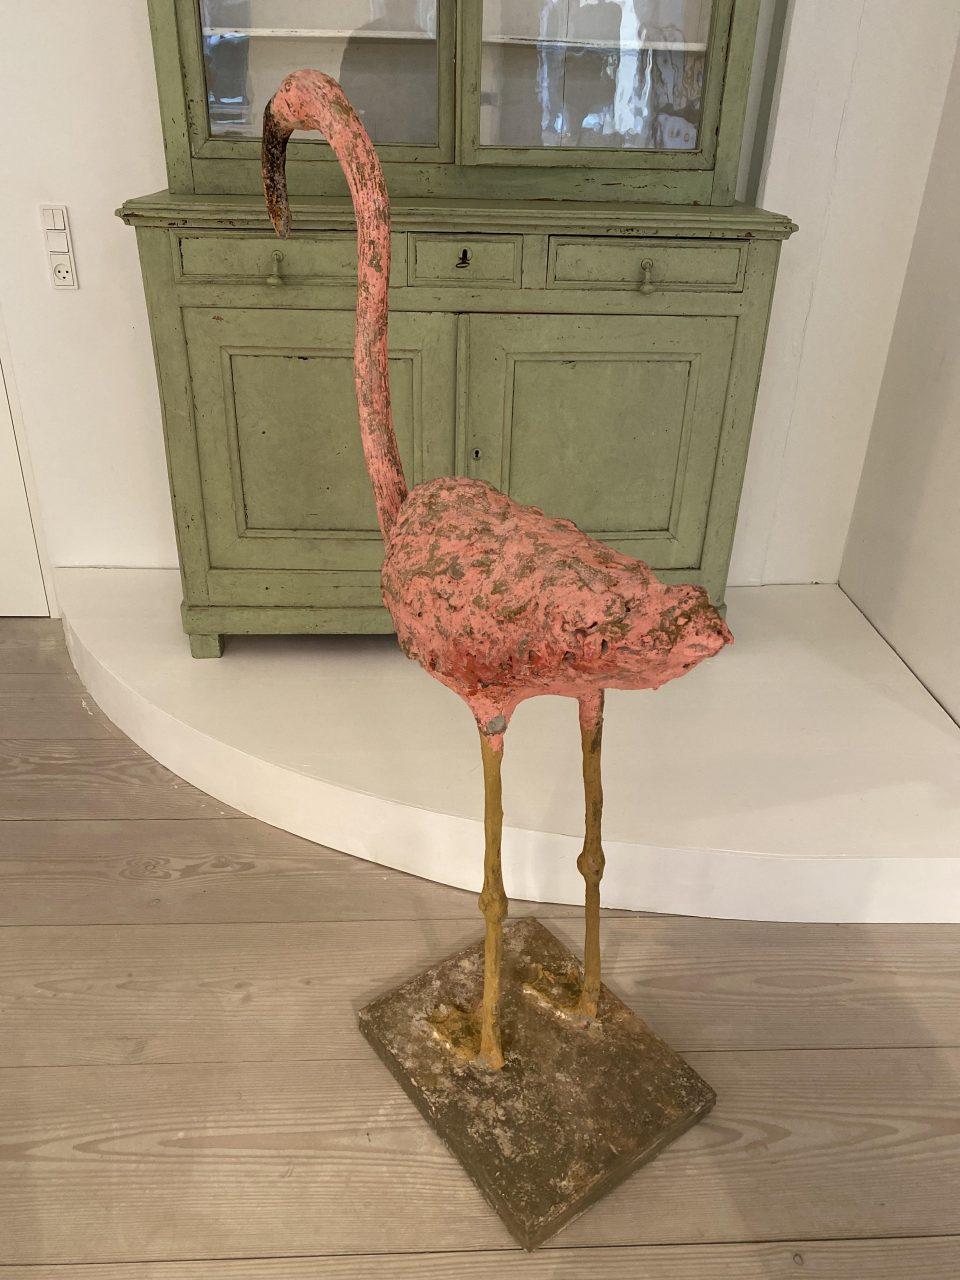 Festive and whimsical mid-century French figure, from the South of France. Formed in cast cement in the shape of a flamingo, this figure was made back in the 1950s-60s, and has the well-known curved neck, pink plumage and thin legs. Puts a smile to